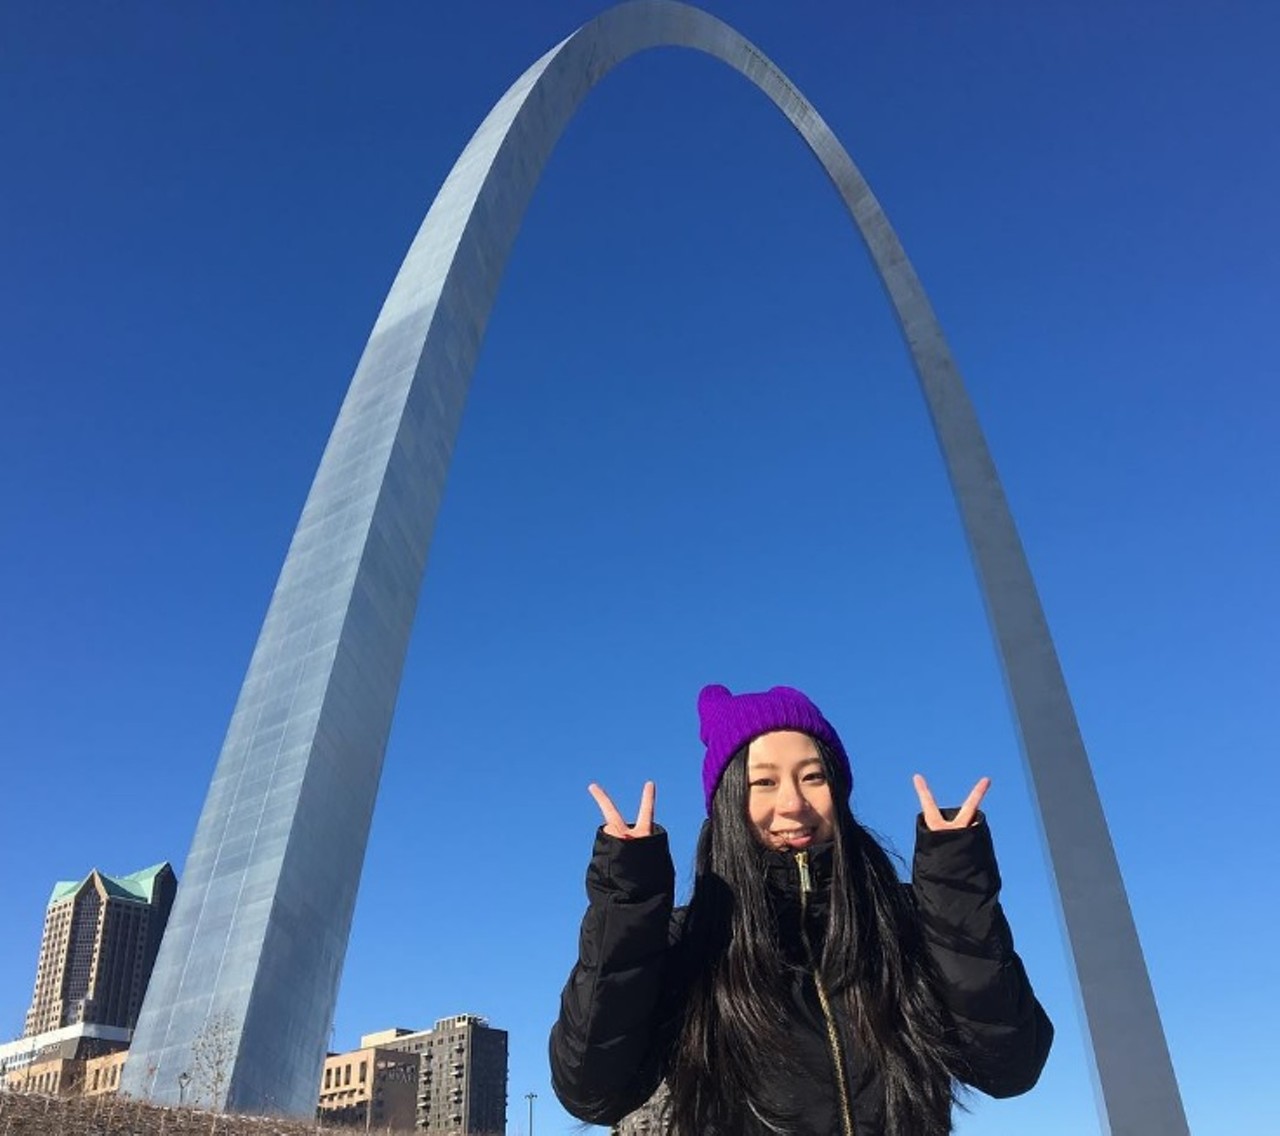 The Gateway Arch
Get a photo from the outside -- because who really has the patience to go up there? Photo courtesy of Instagram / zoe_j_zhang.